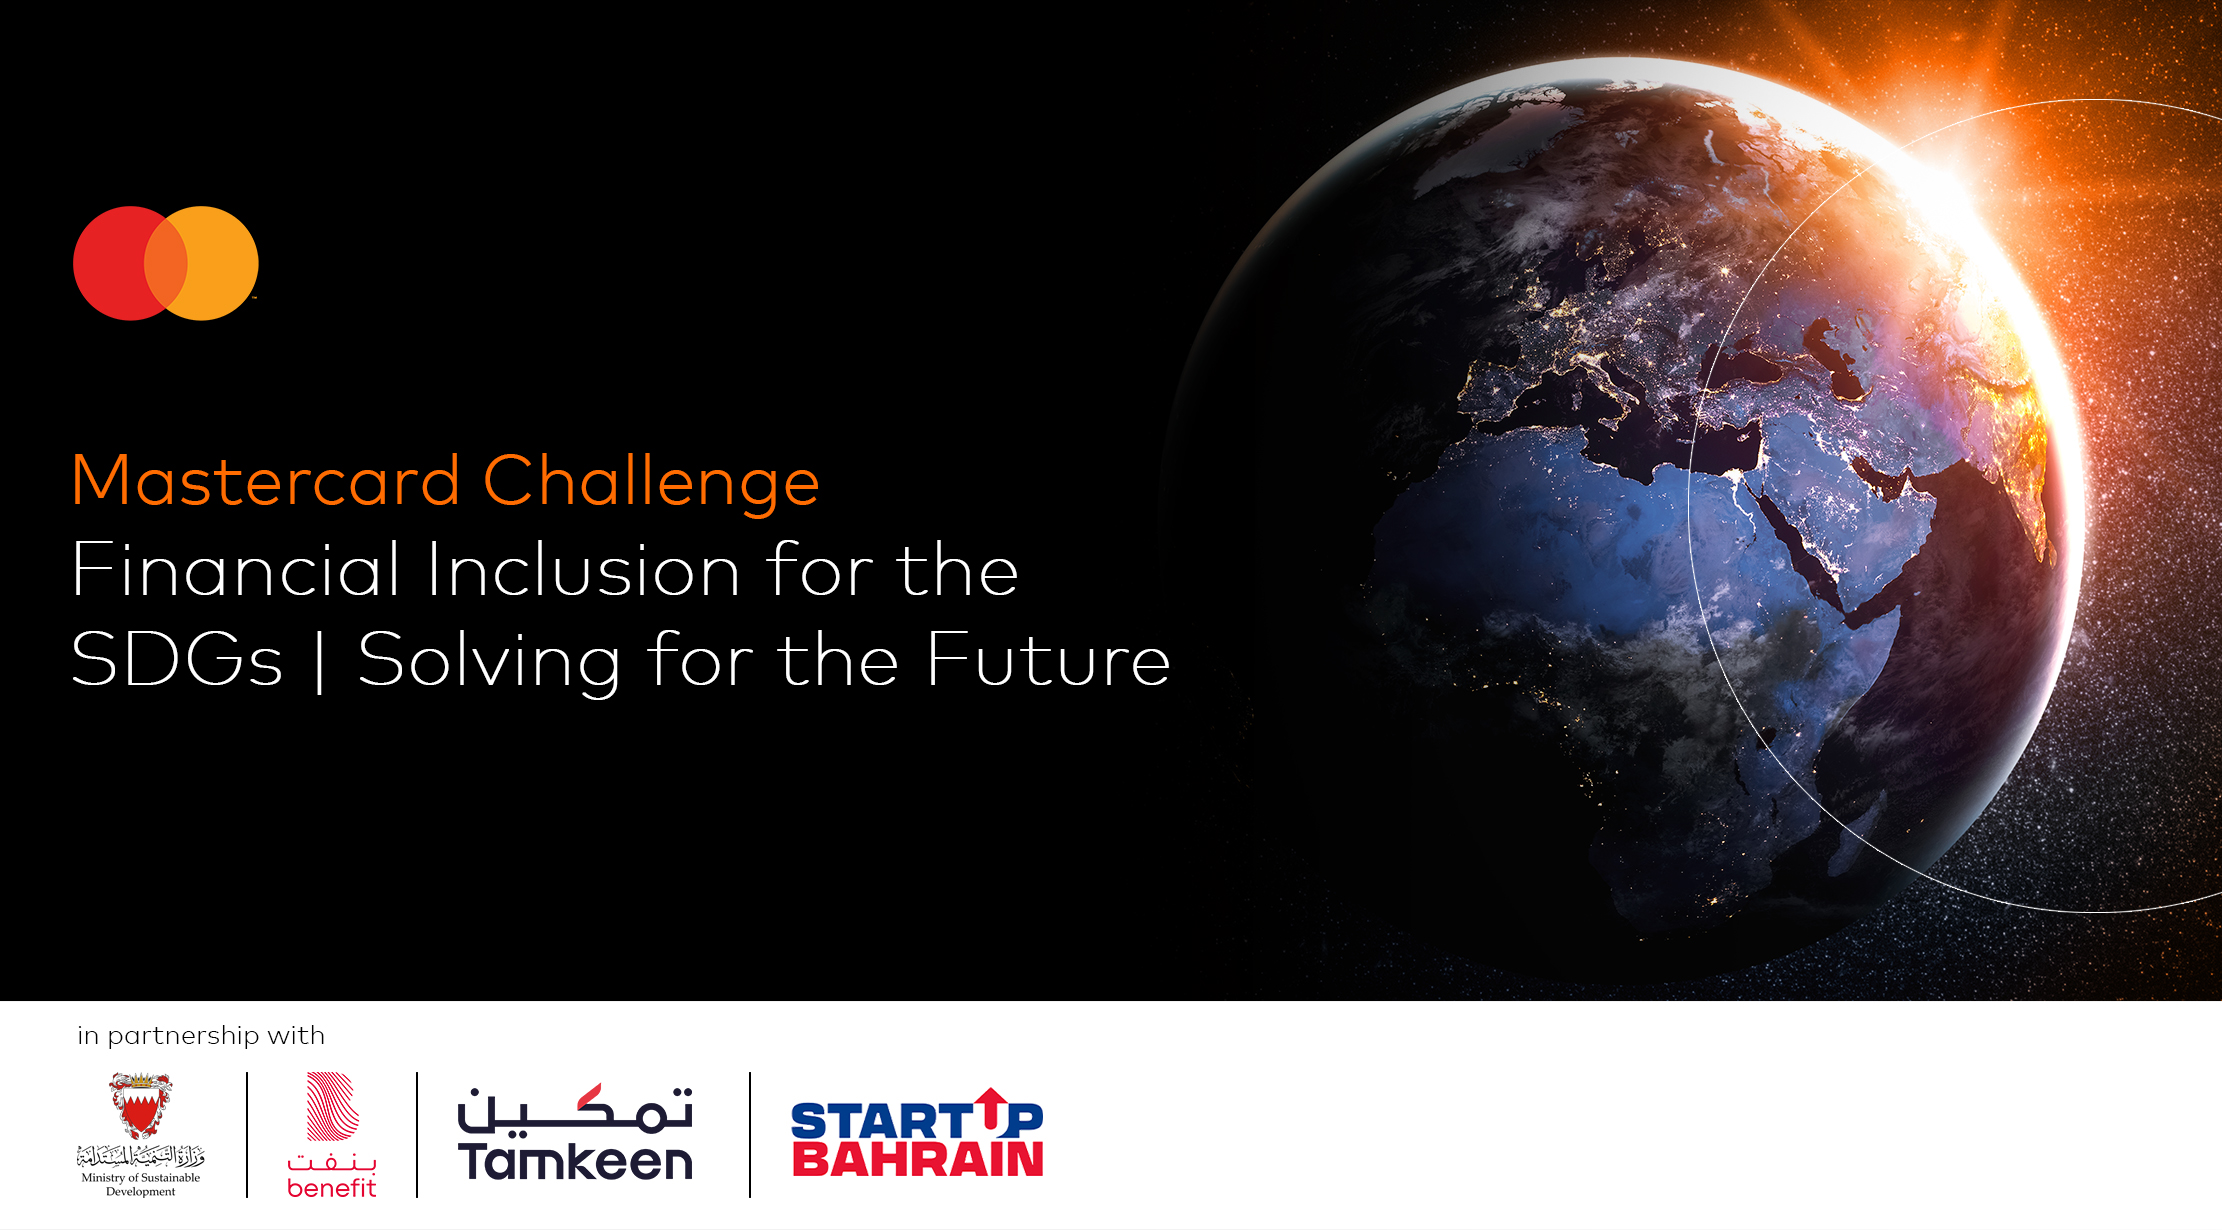 Mastercard launches a university challenge on financial inclusion for the SDGs in partnership with the Ministry of Sustainable Development, BENEFIT, Tamkeen and StartUp Bahrain